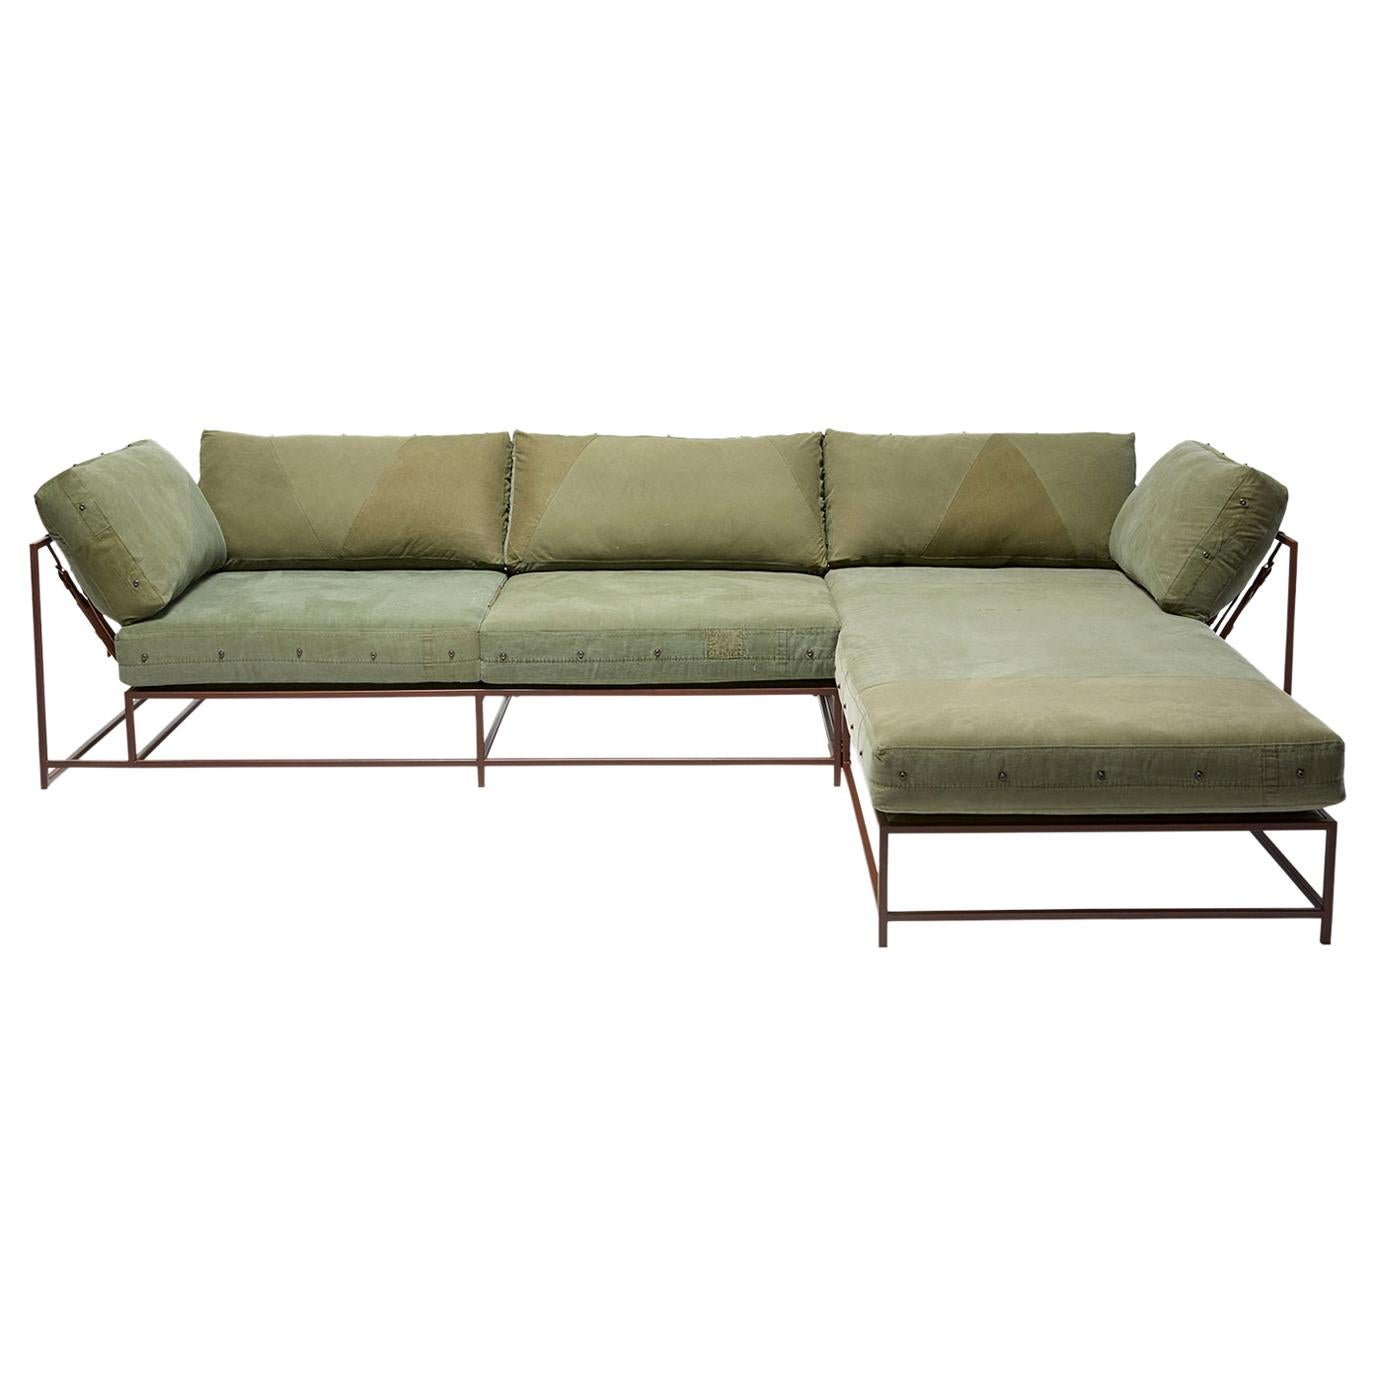 Vintage Military Canvas & Marbled Rust Lounge Sectional